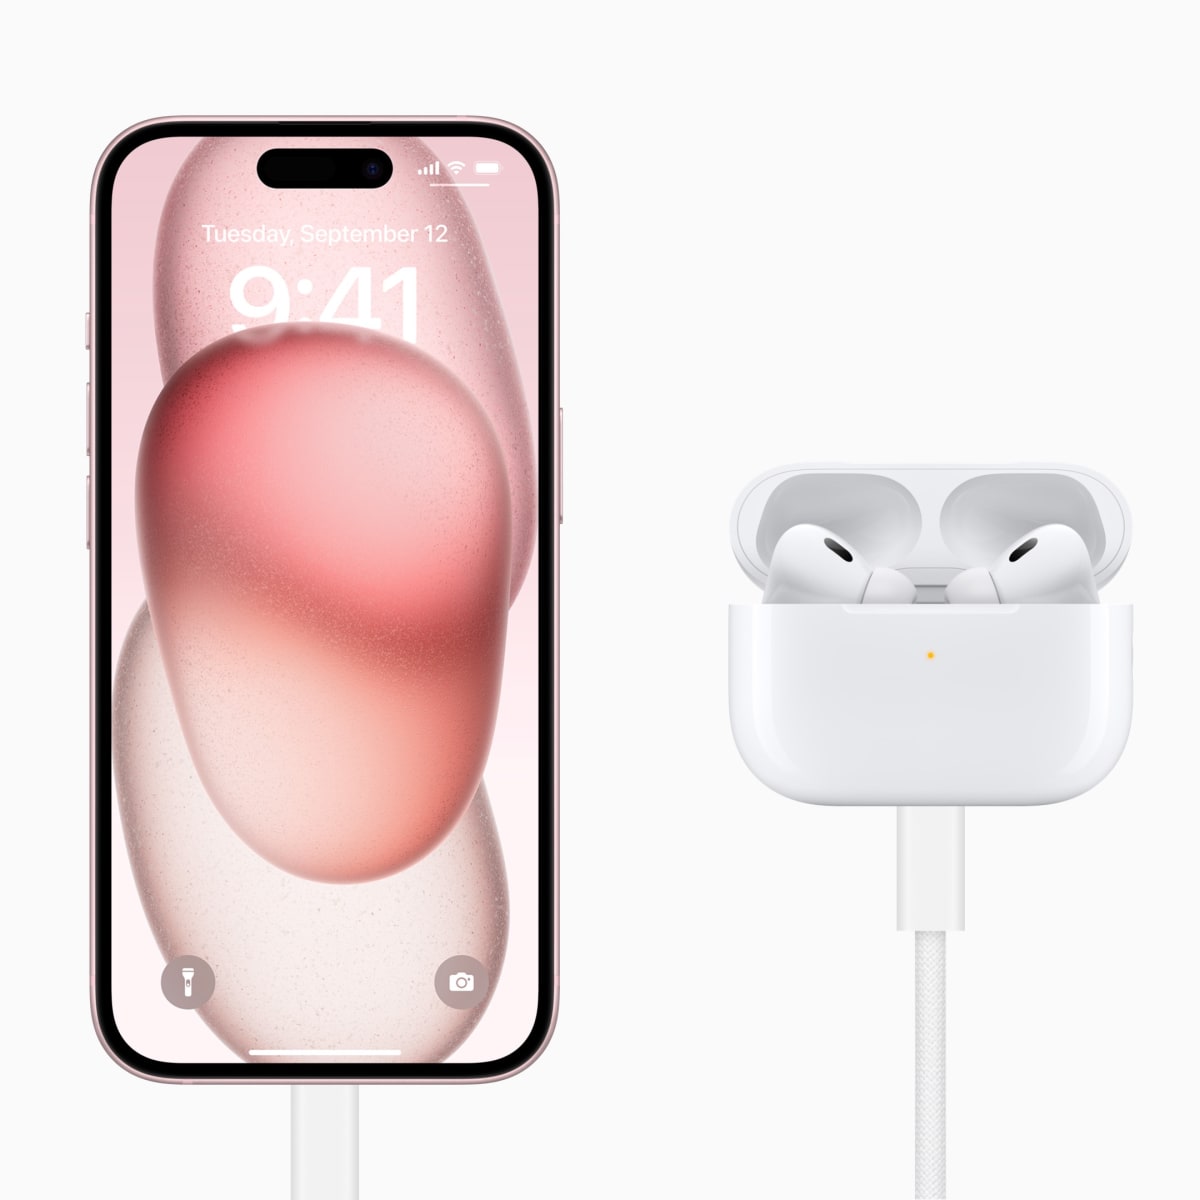 Apple's New AirPods Pro 2nd Gen with USB-C Case